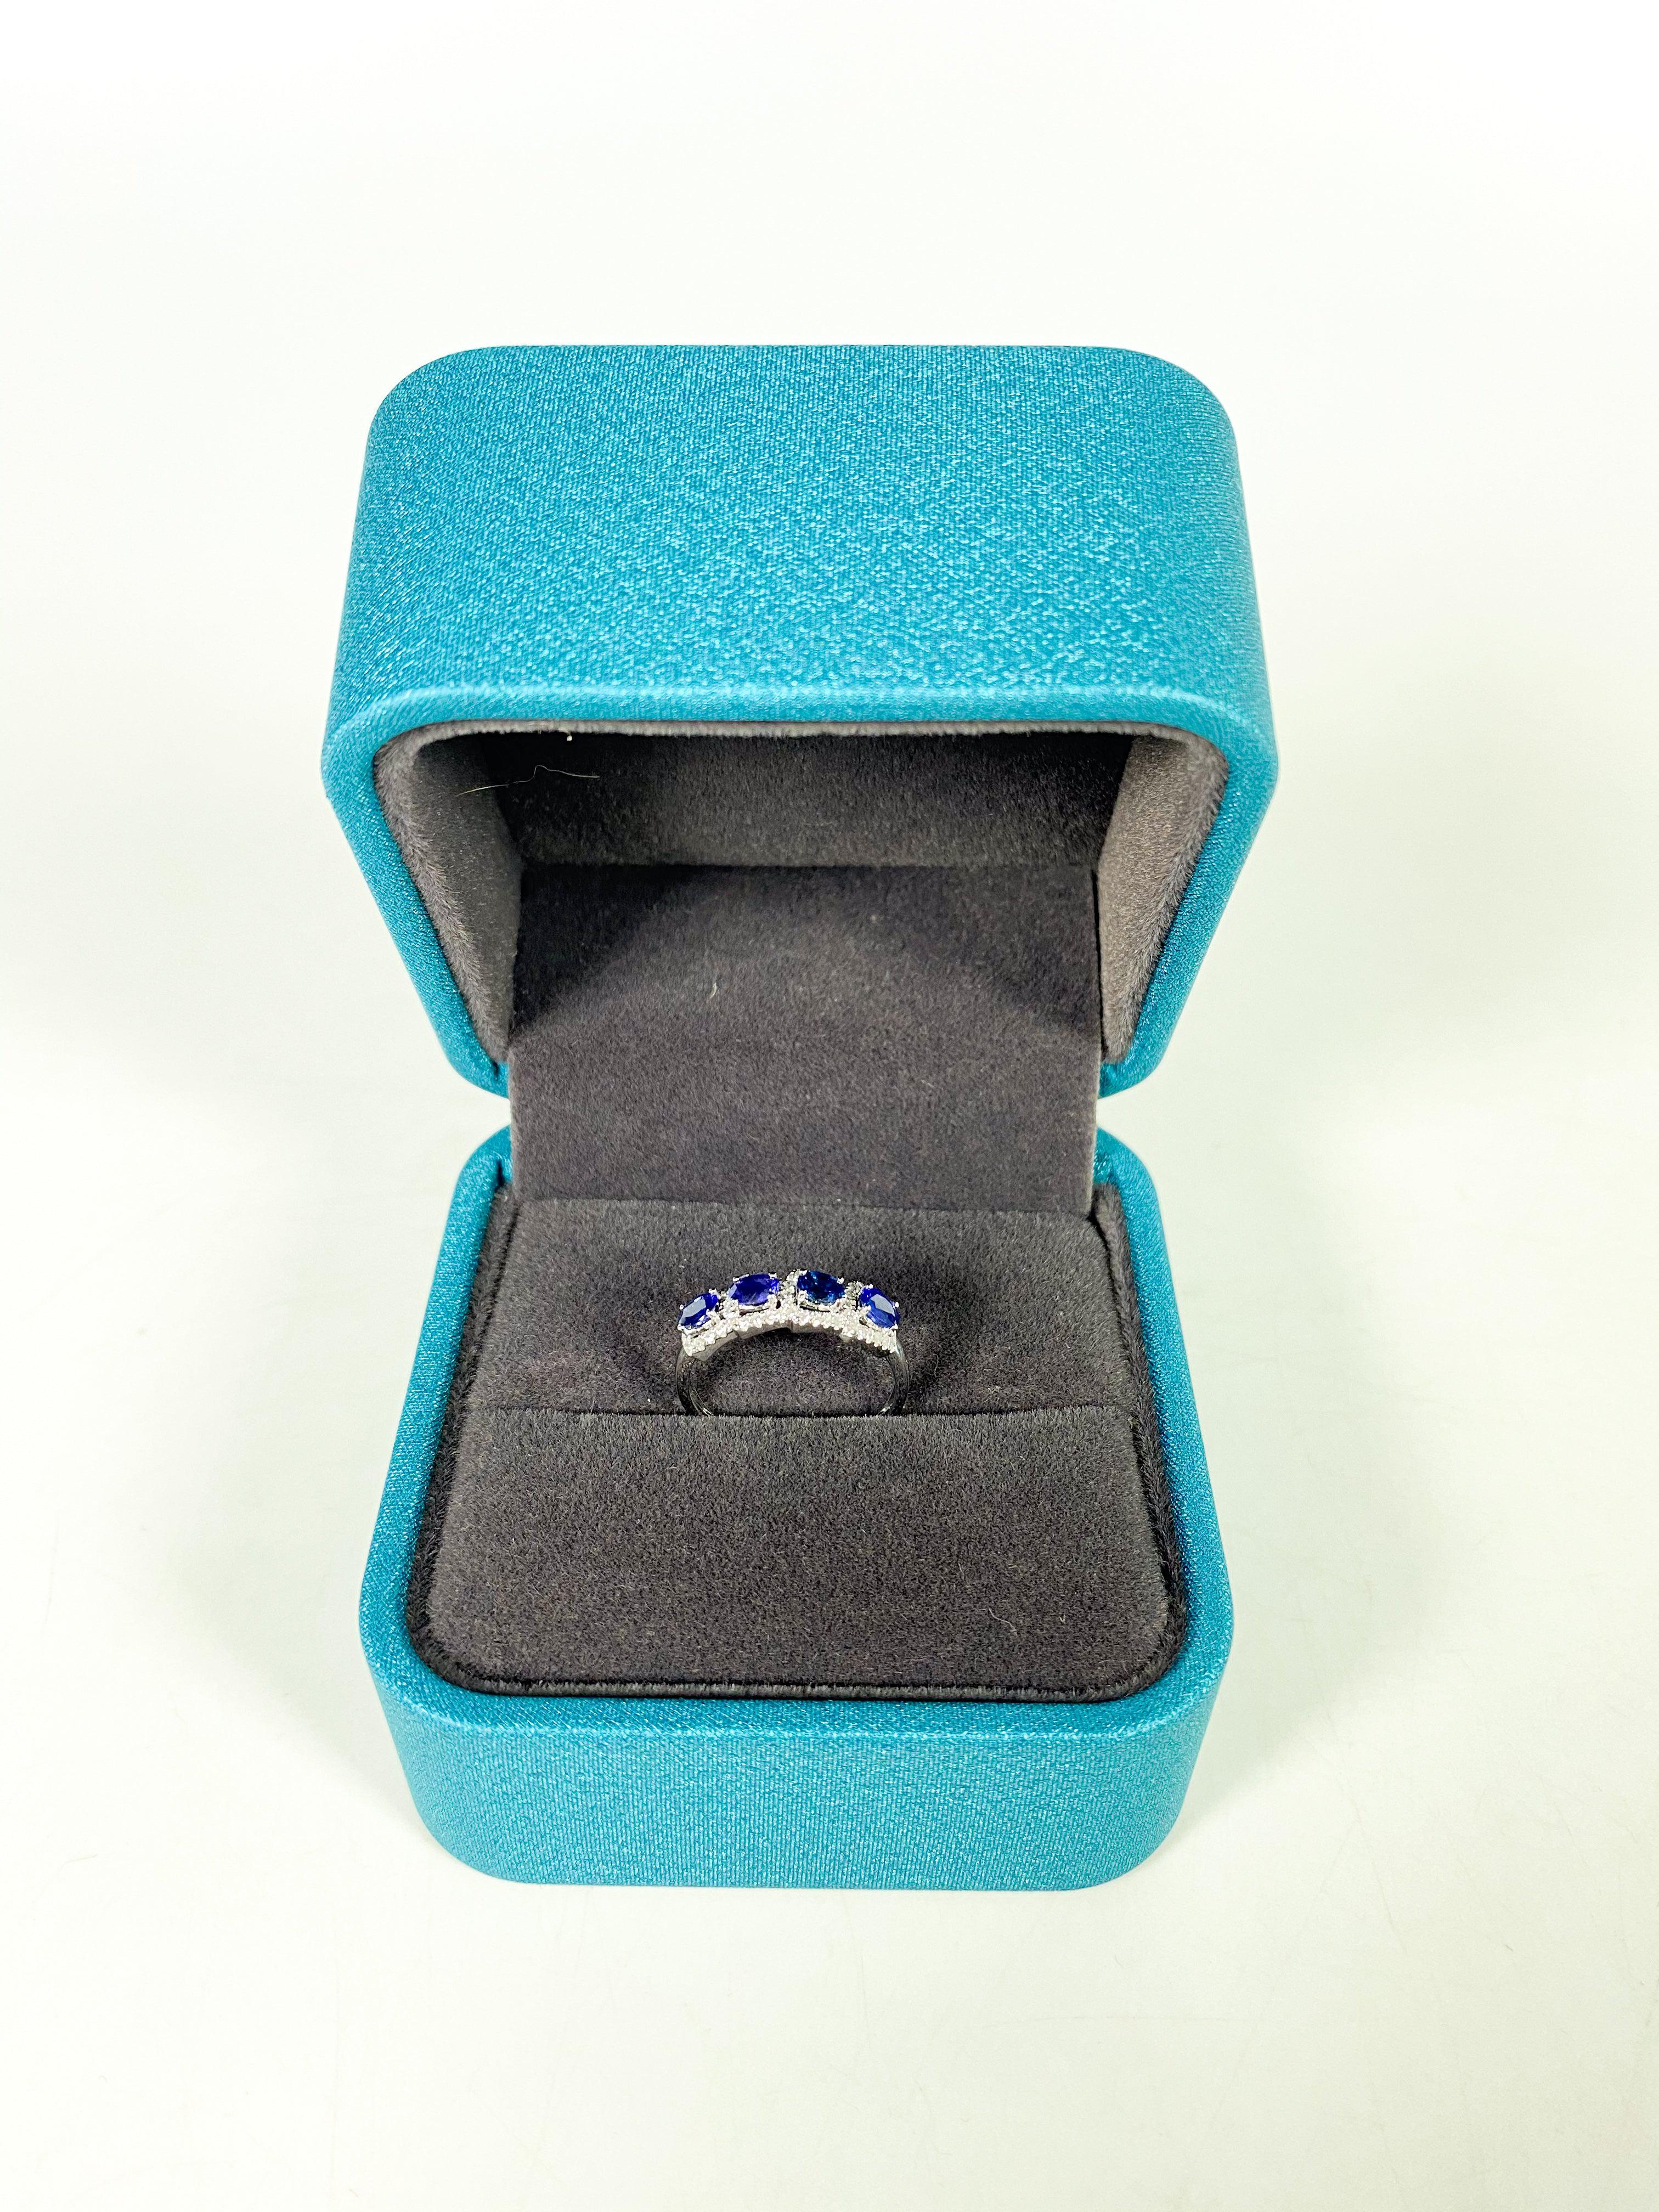 Diamond Ring in 18k White Gold and Blue Sapphire (size 6)